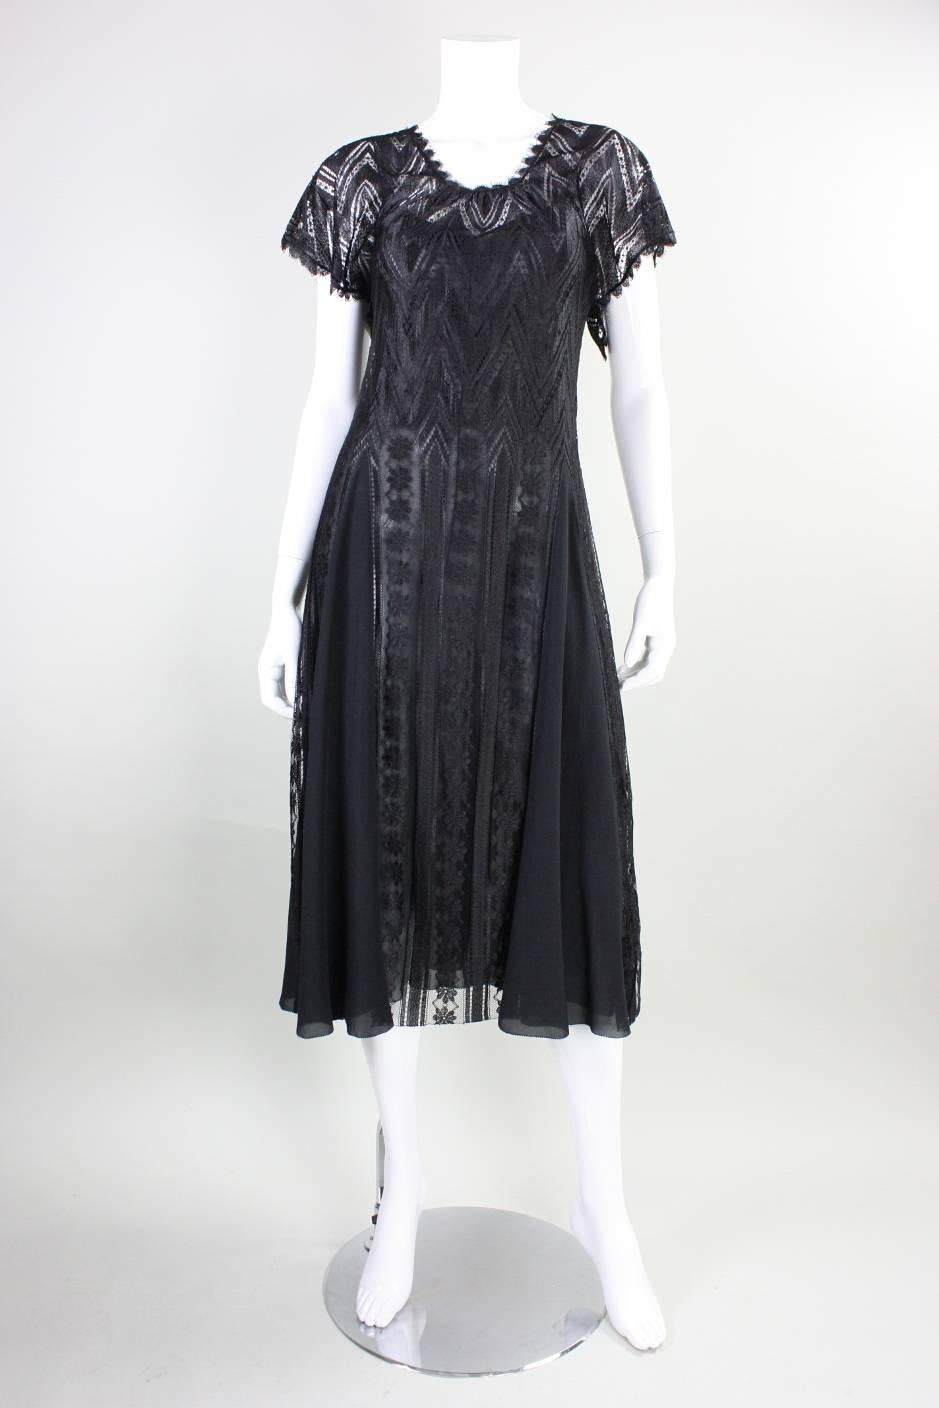 Vintage cocktail dress from Holly's Harp dates to the 1970's through mid-1980's. It is made of floral and geometric patterned lace with silk godets in the skirt.  Rounded scoop neckline is gathered all around.  No closures.  Matching bias-cut black